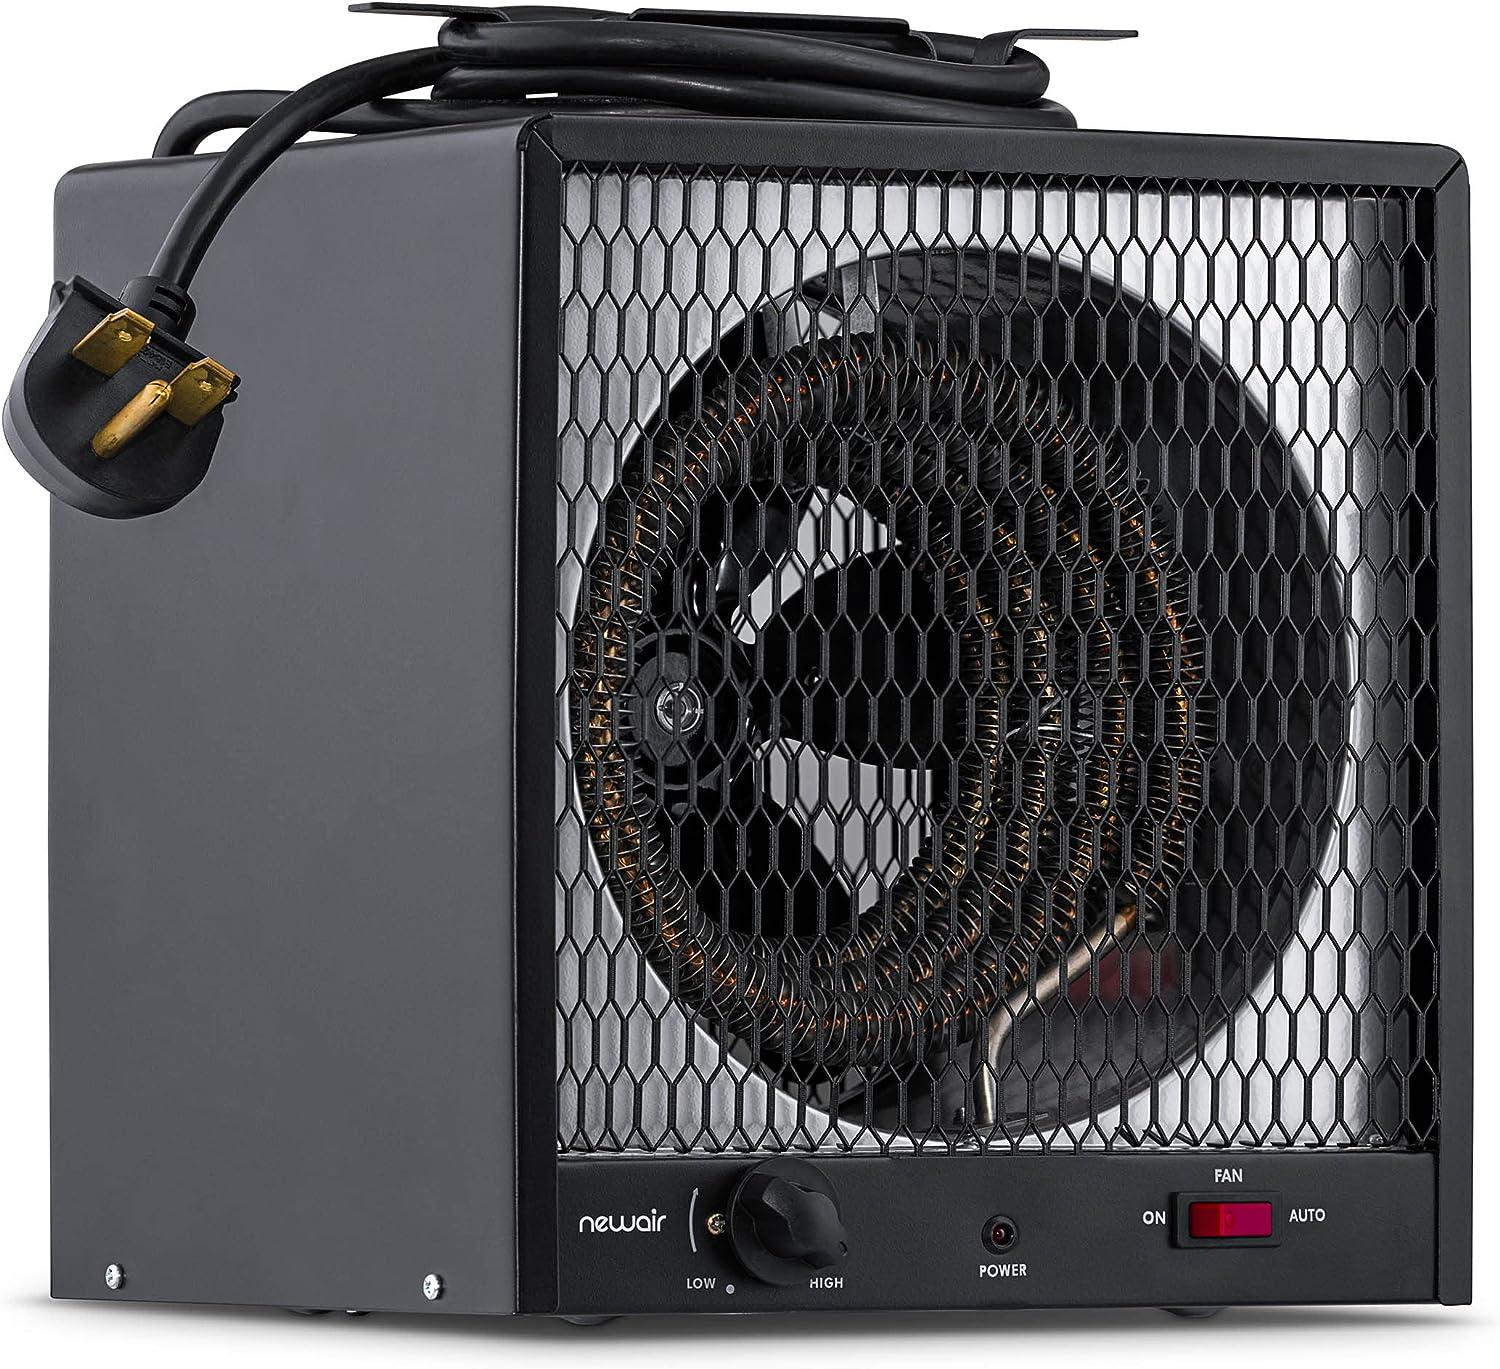 NewAir G56 Portable Electric Garage Heater for $99.99 Shipped